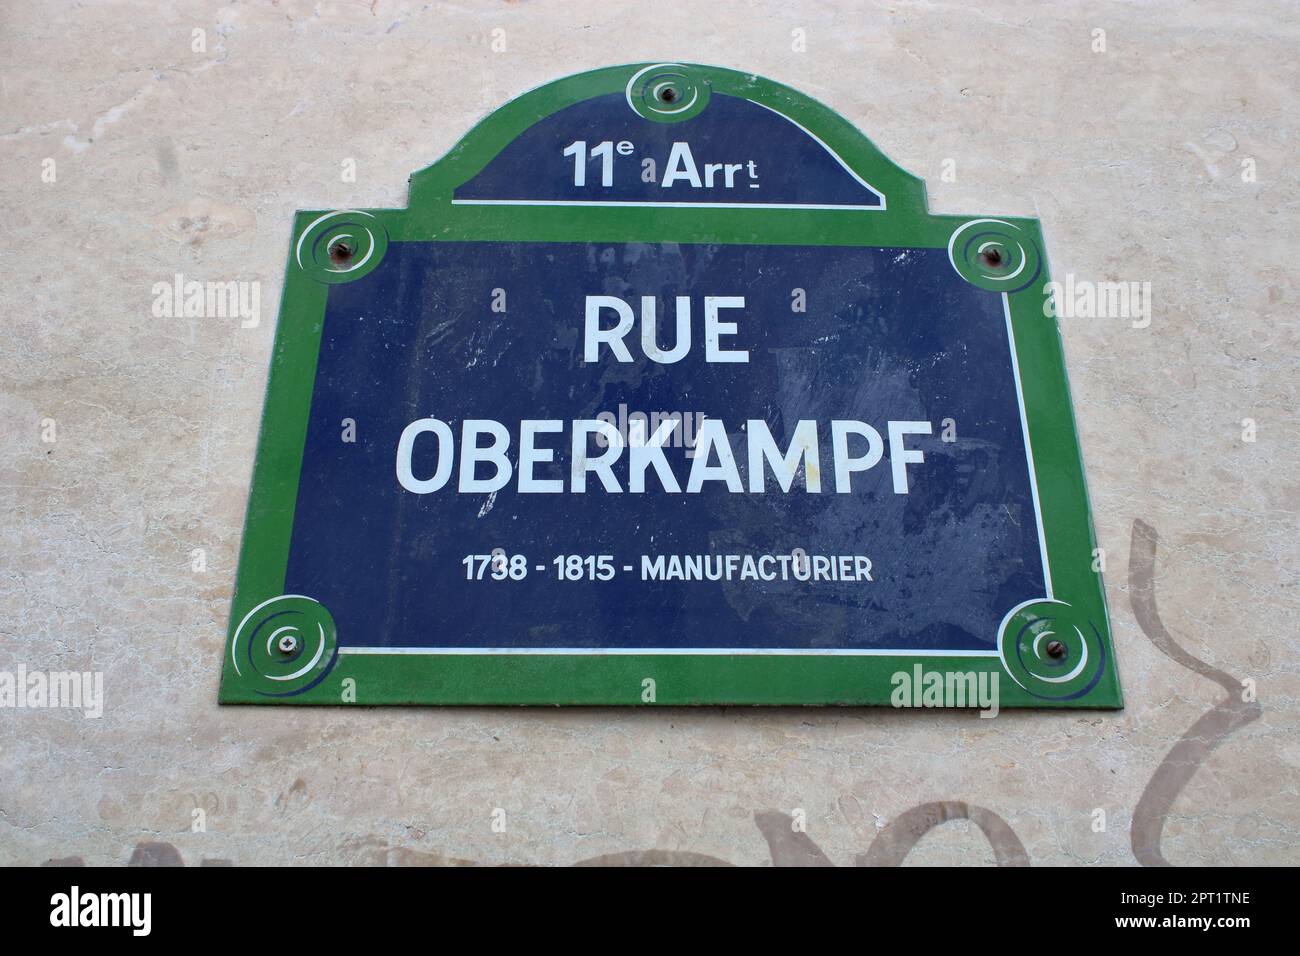 Typical Paris blue and green street-sign here depicting the famous Rue Oberkampf in the 11th arrondissement of Paris France. Stock Photo